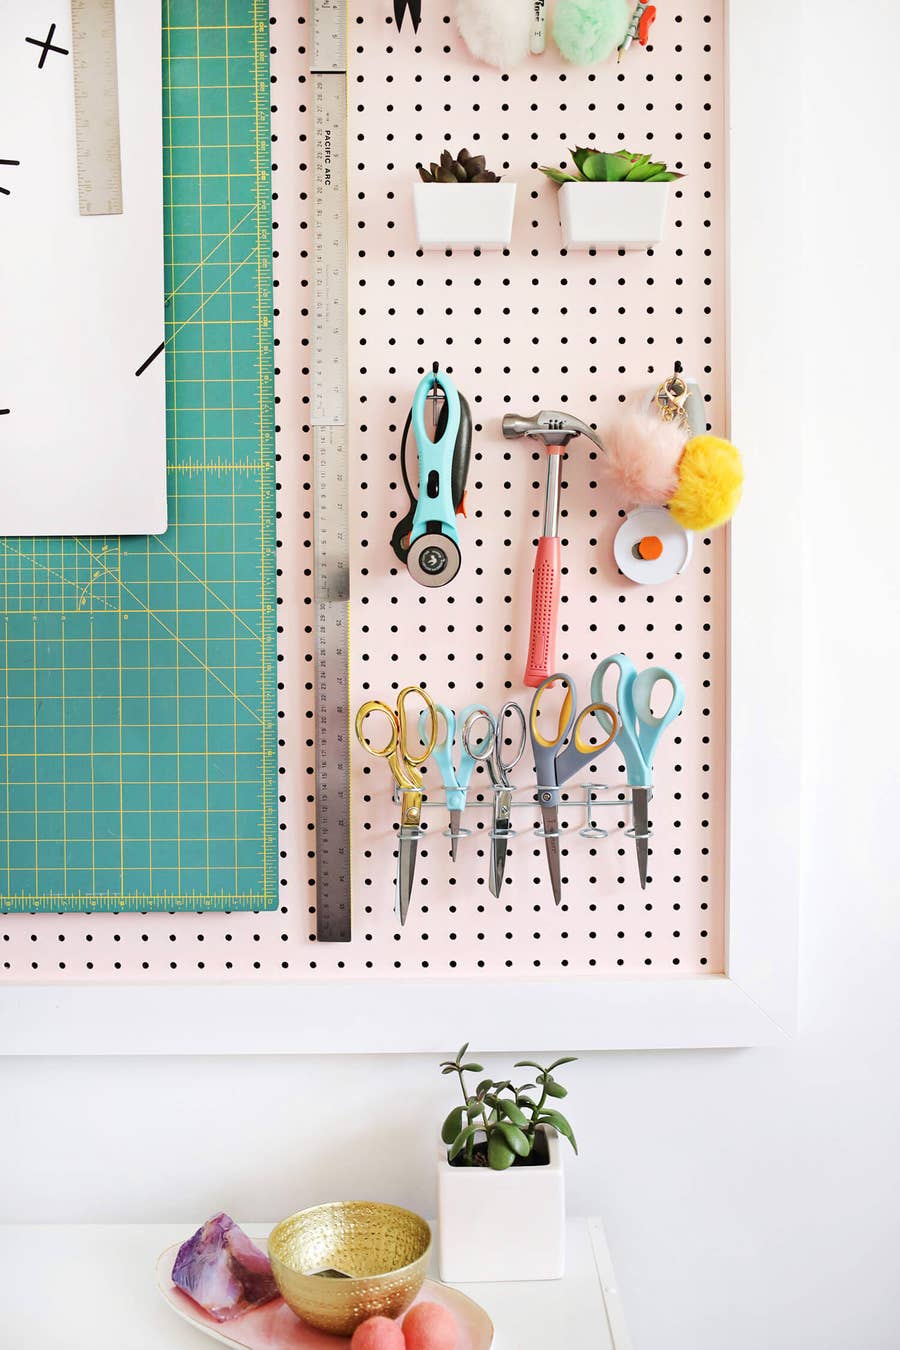 26 Ways To Act Like You're Actually An Organized Person